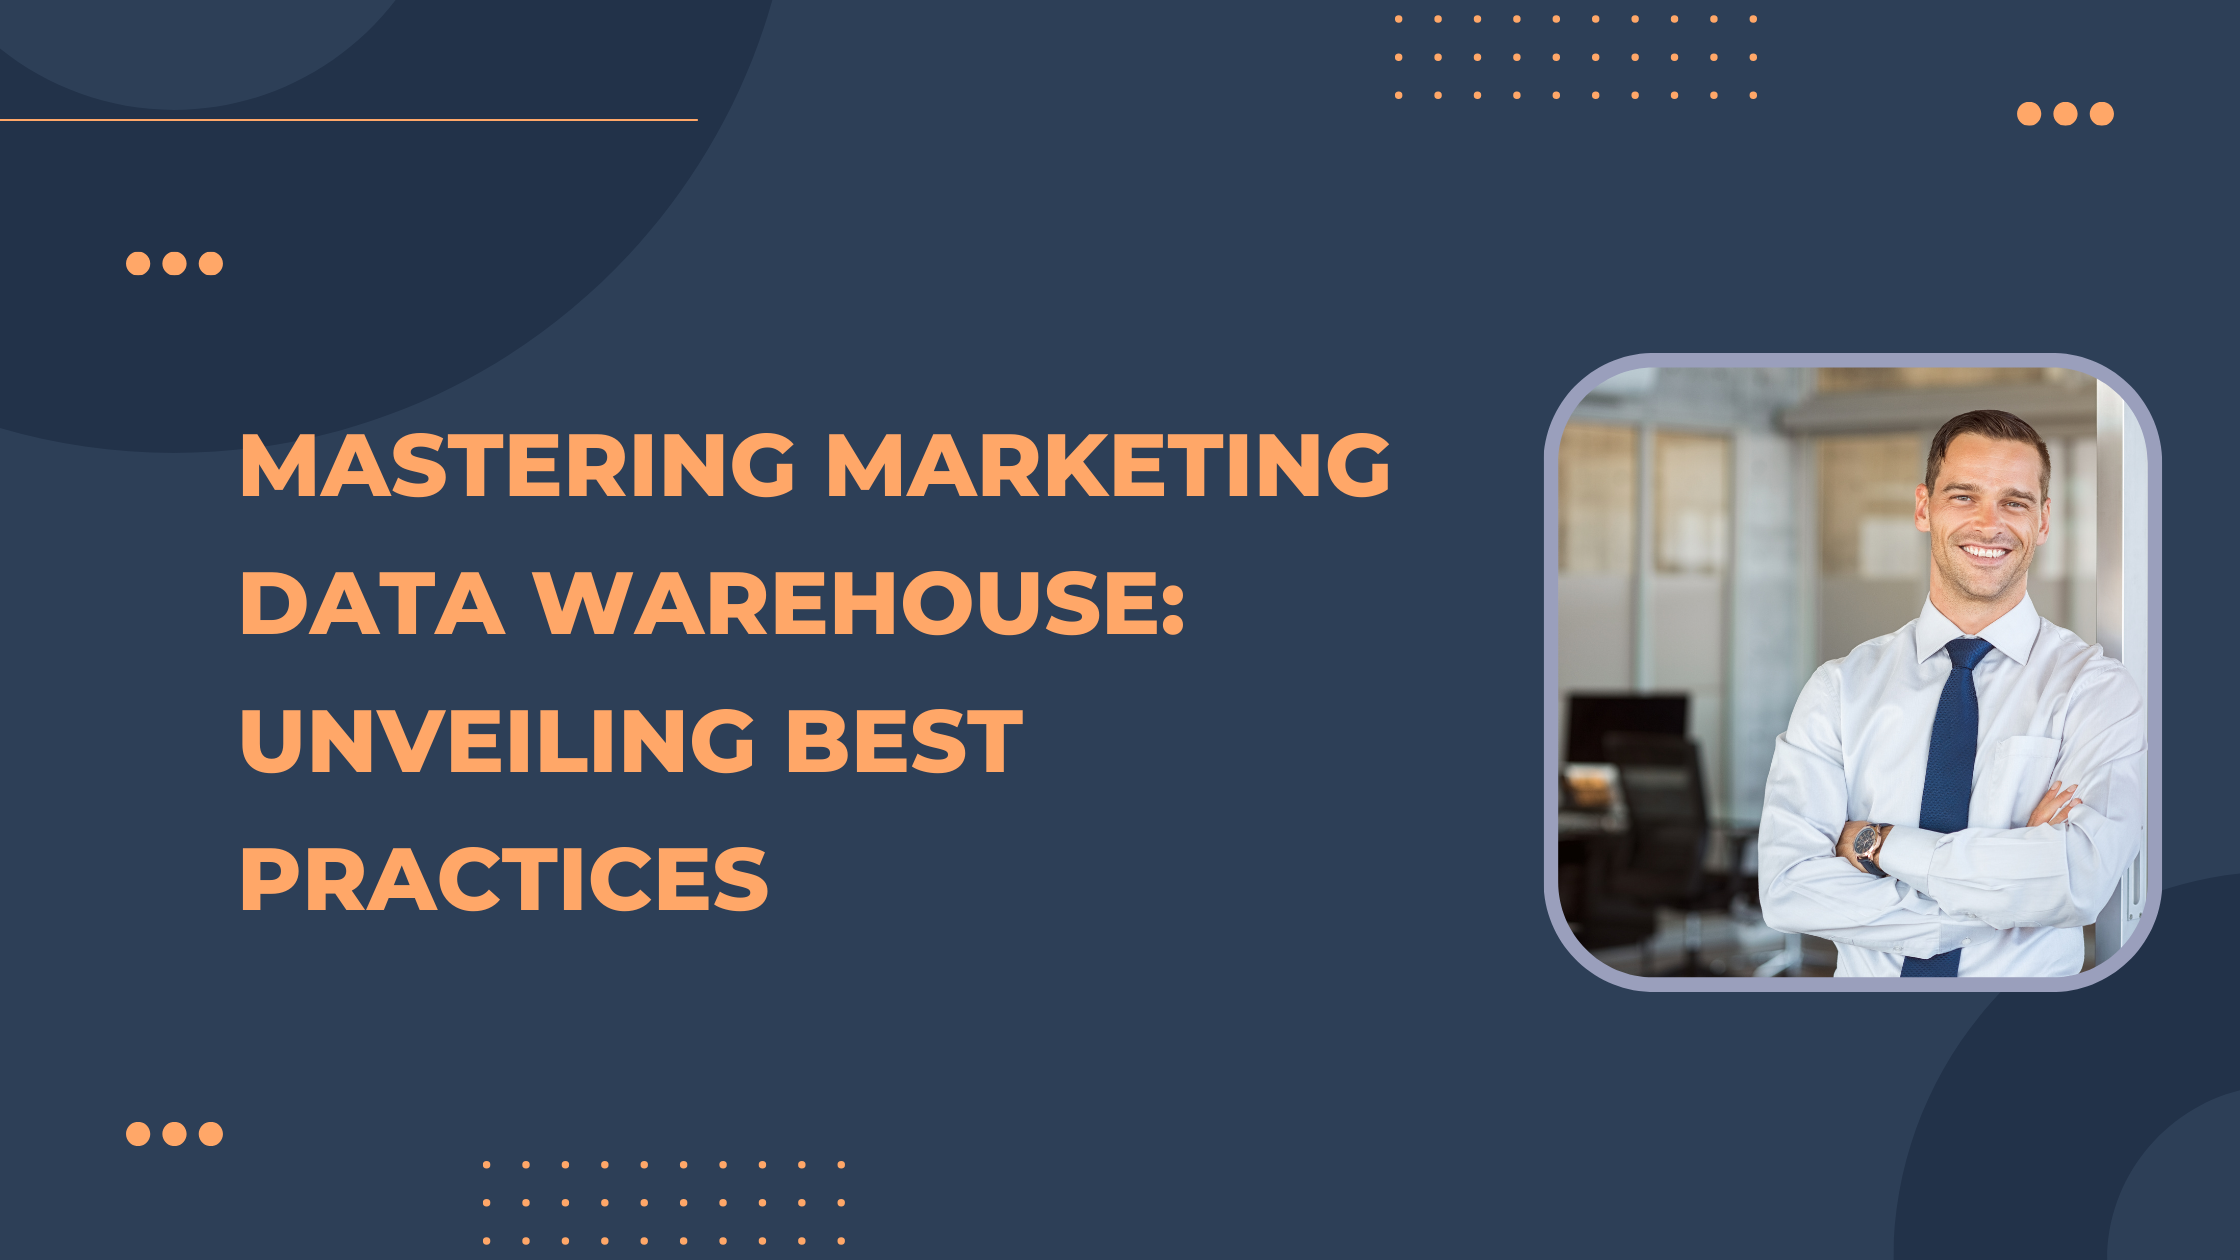 Mastering Marketing Data Warehouse: Unveiling Best Practices